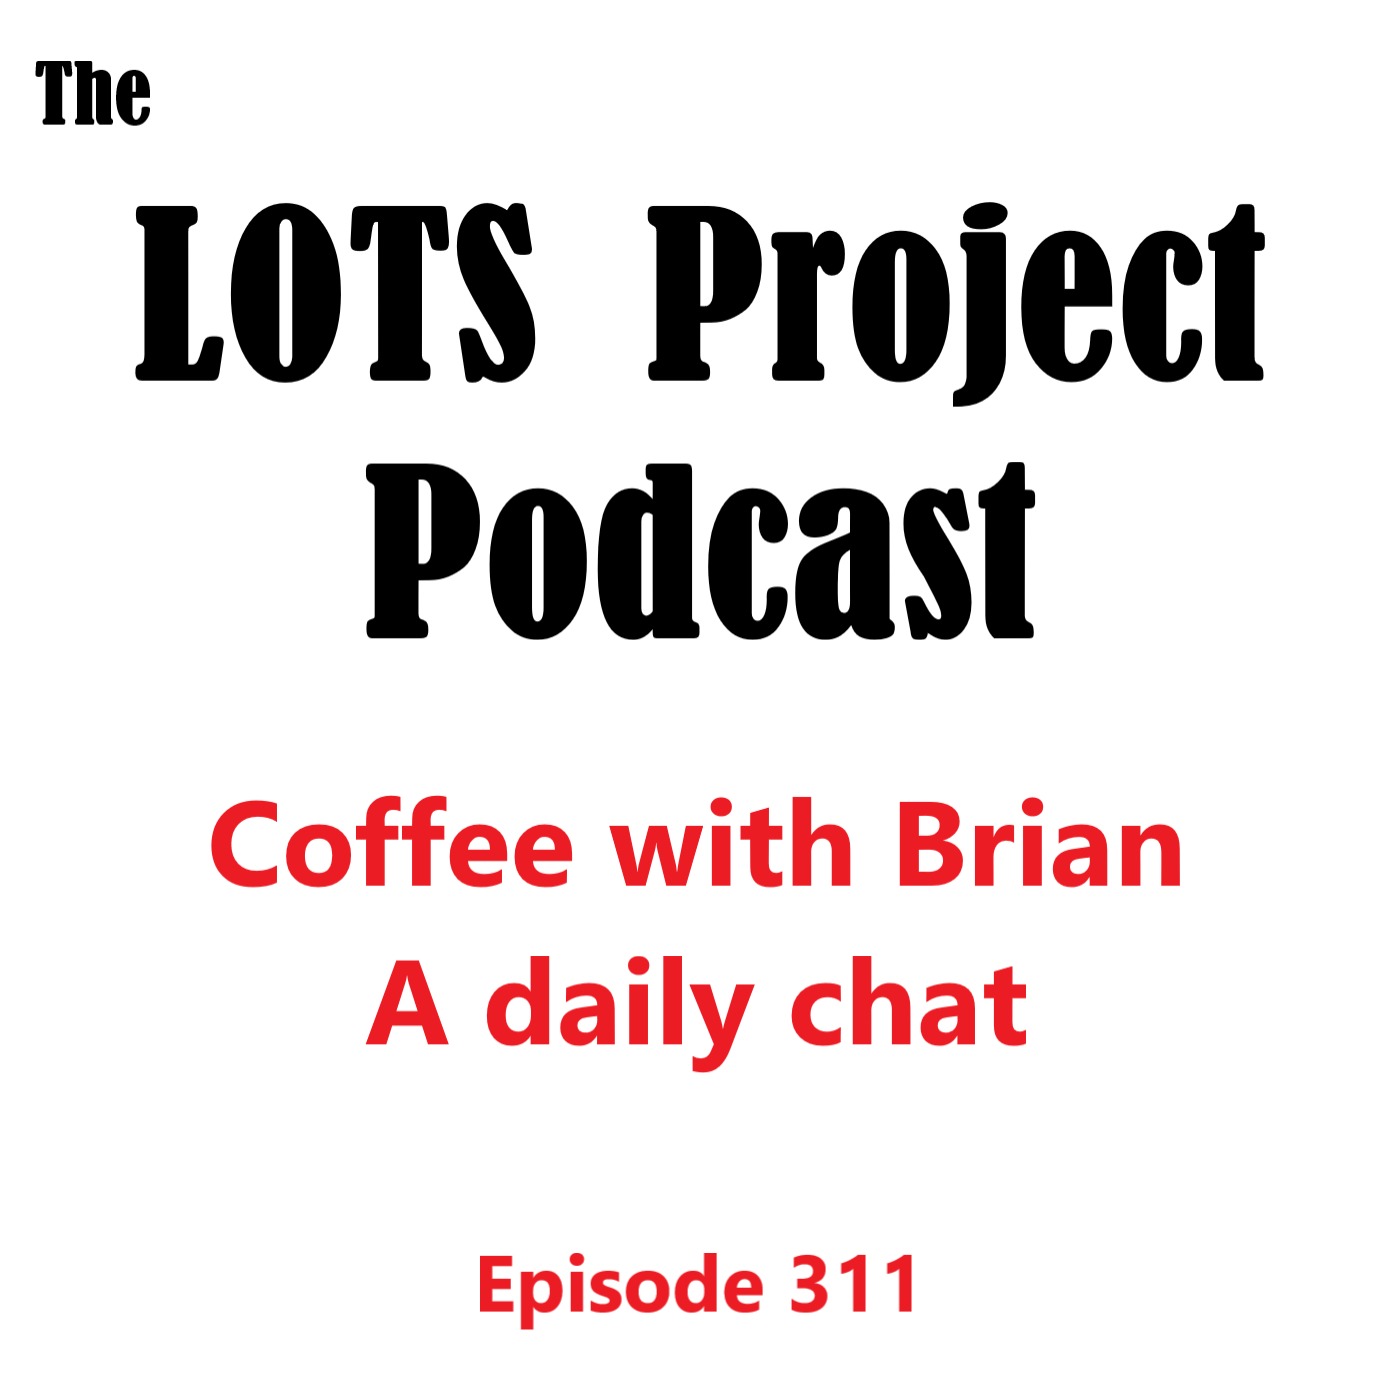 Episode 311 Coffee with Brian, A Daily Morning Chat #podcast #daily #nomad #coffee